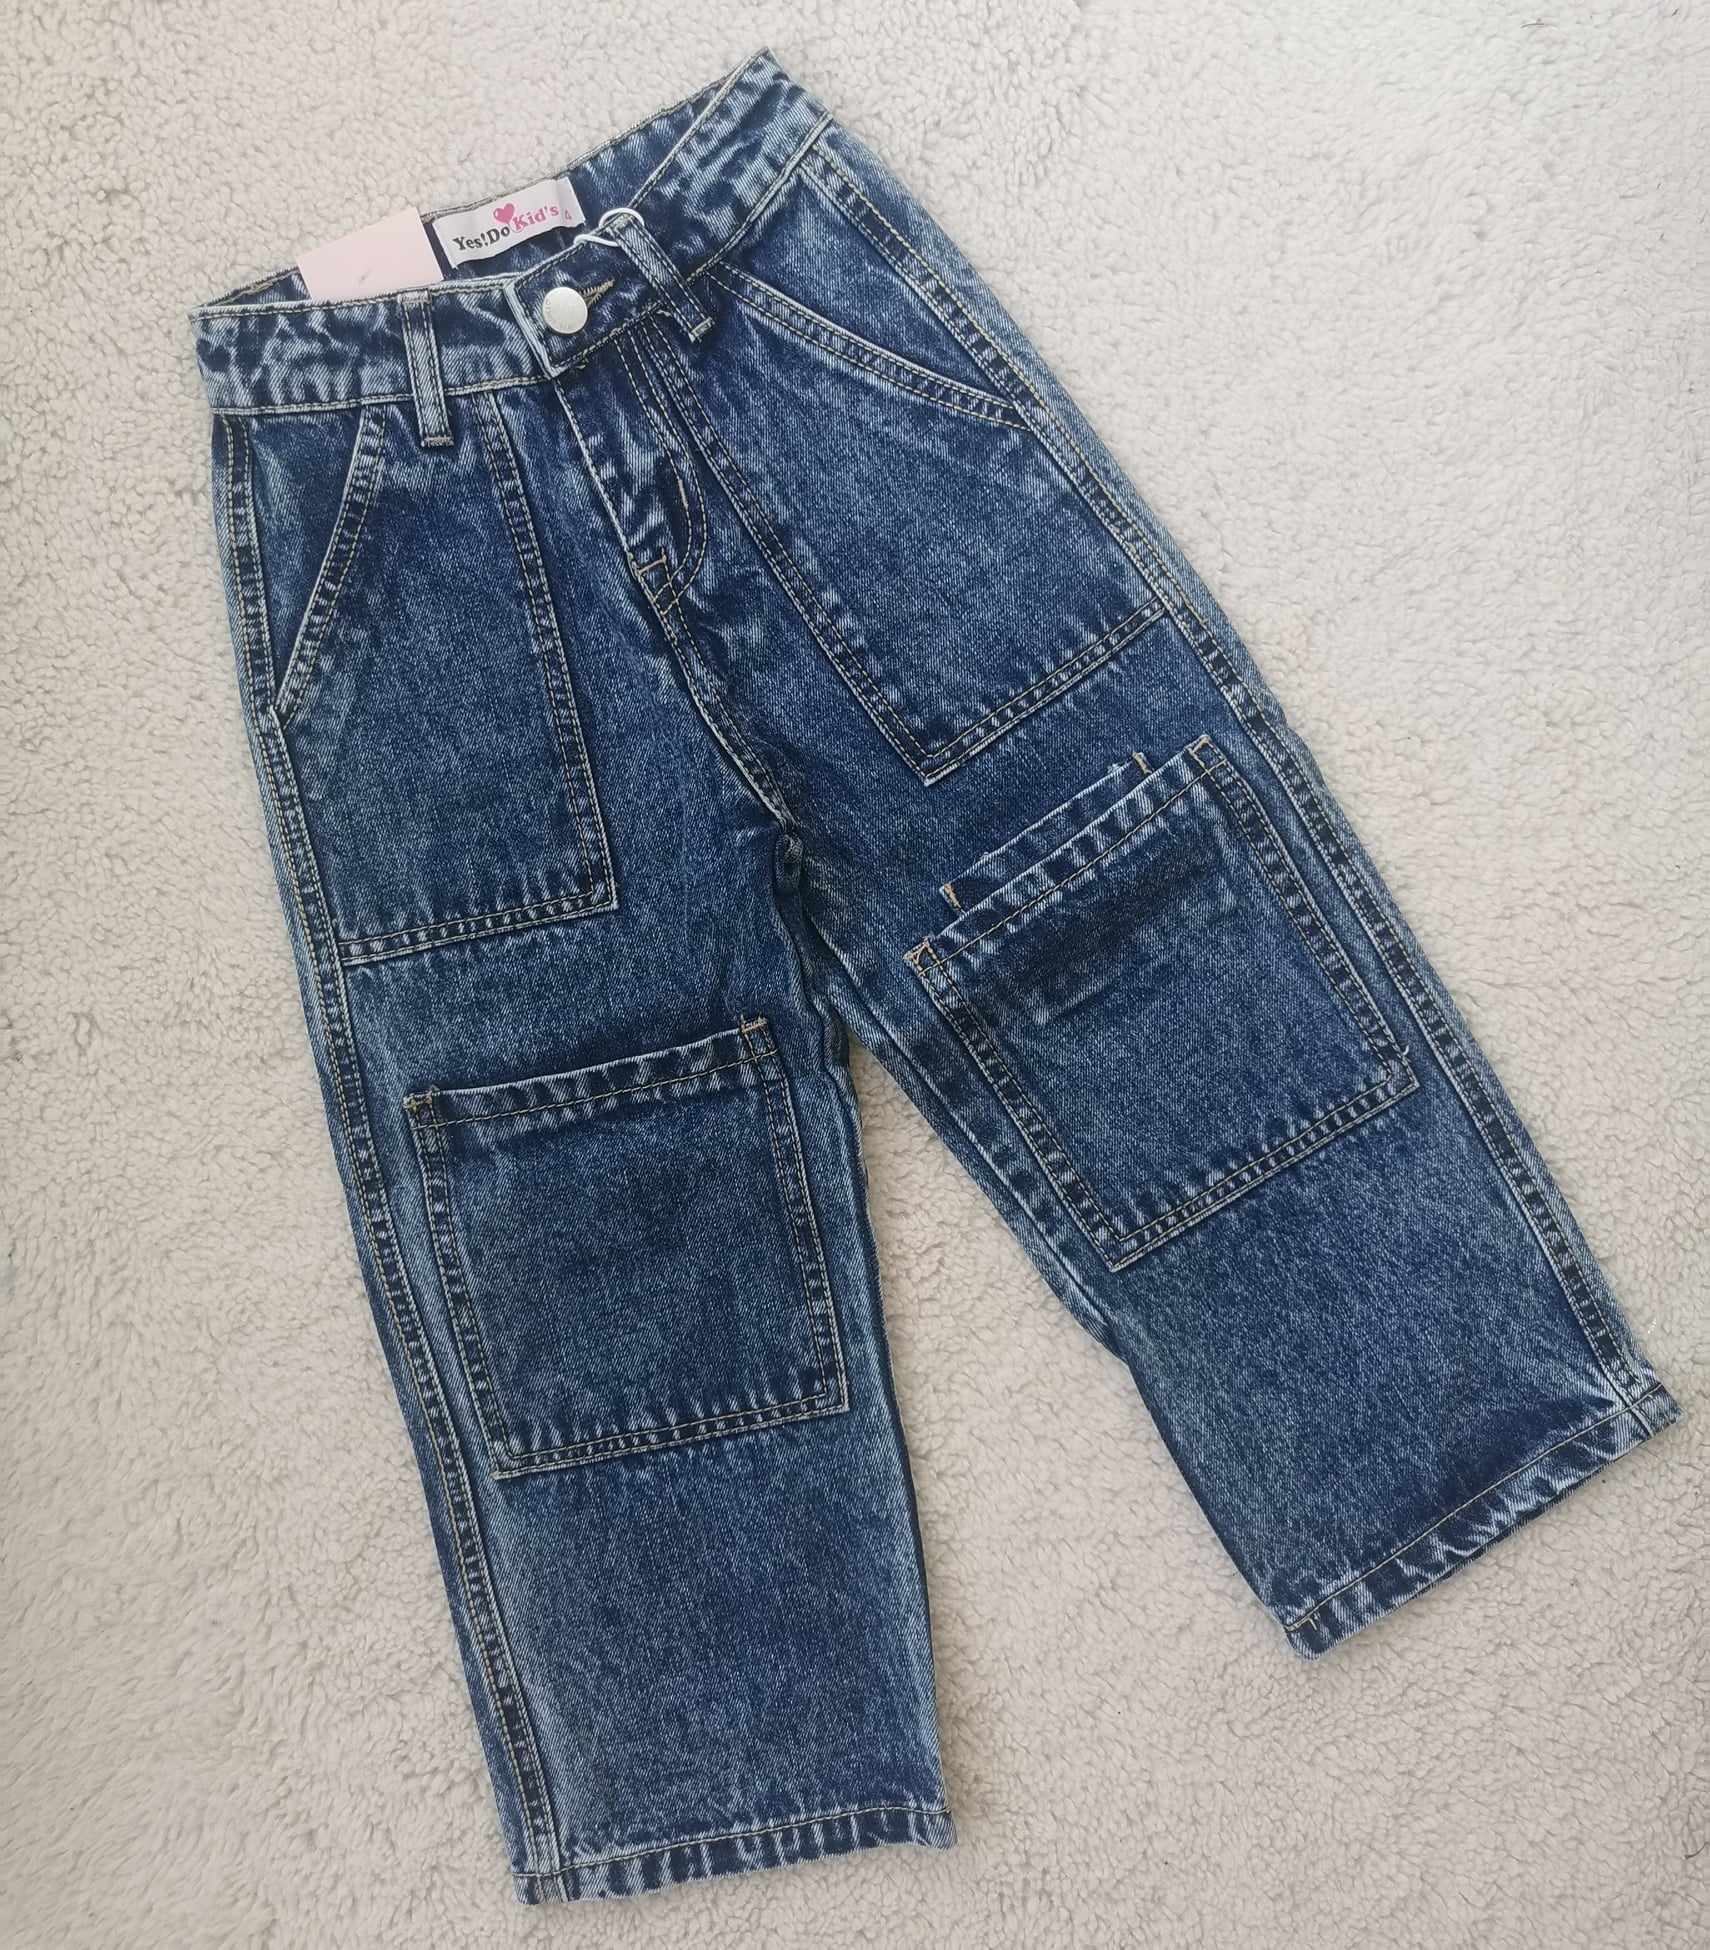 TROUSER YESDOKIDS 23/24 MONOC. JEANS WITH DOUBLE POCKET INFRONT GIRL